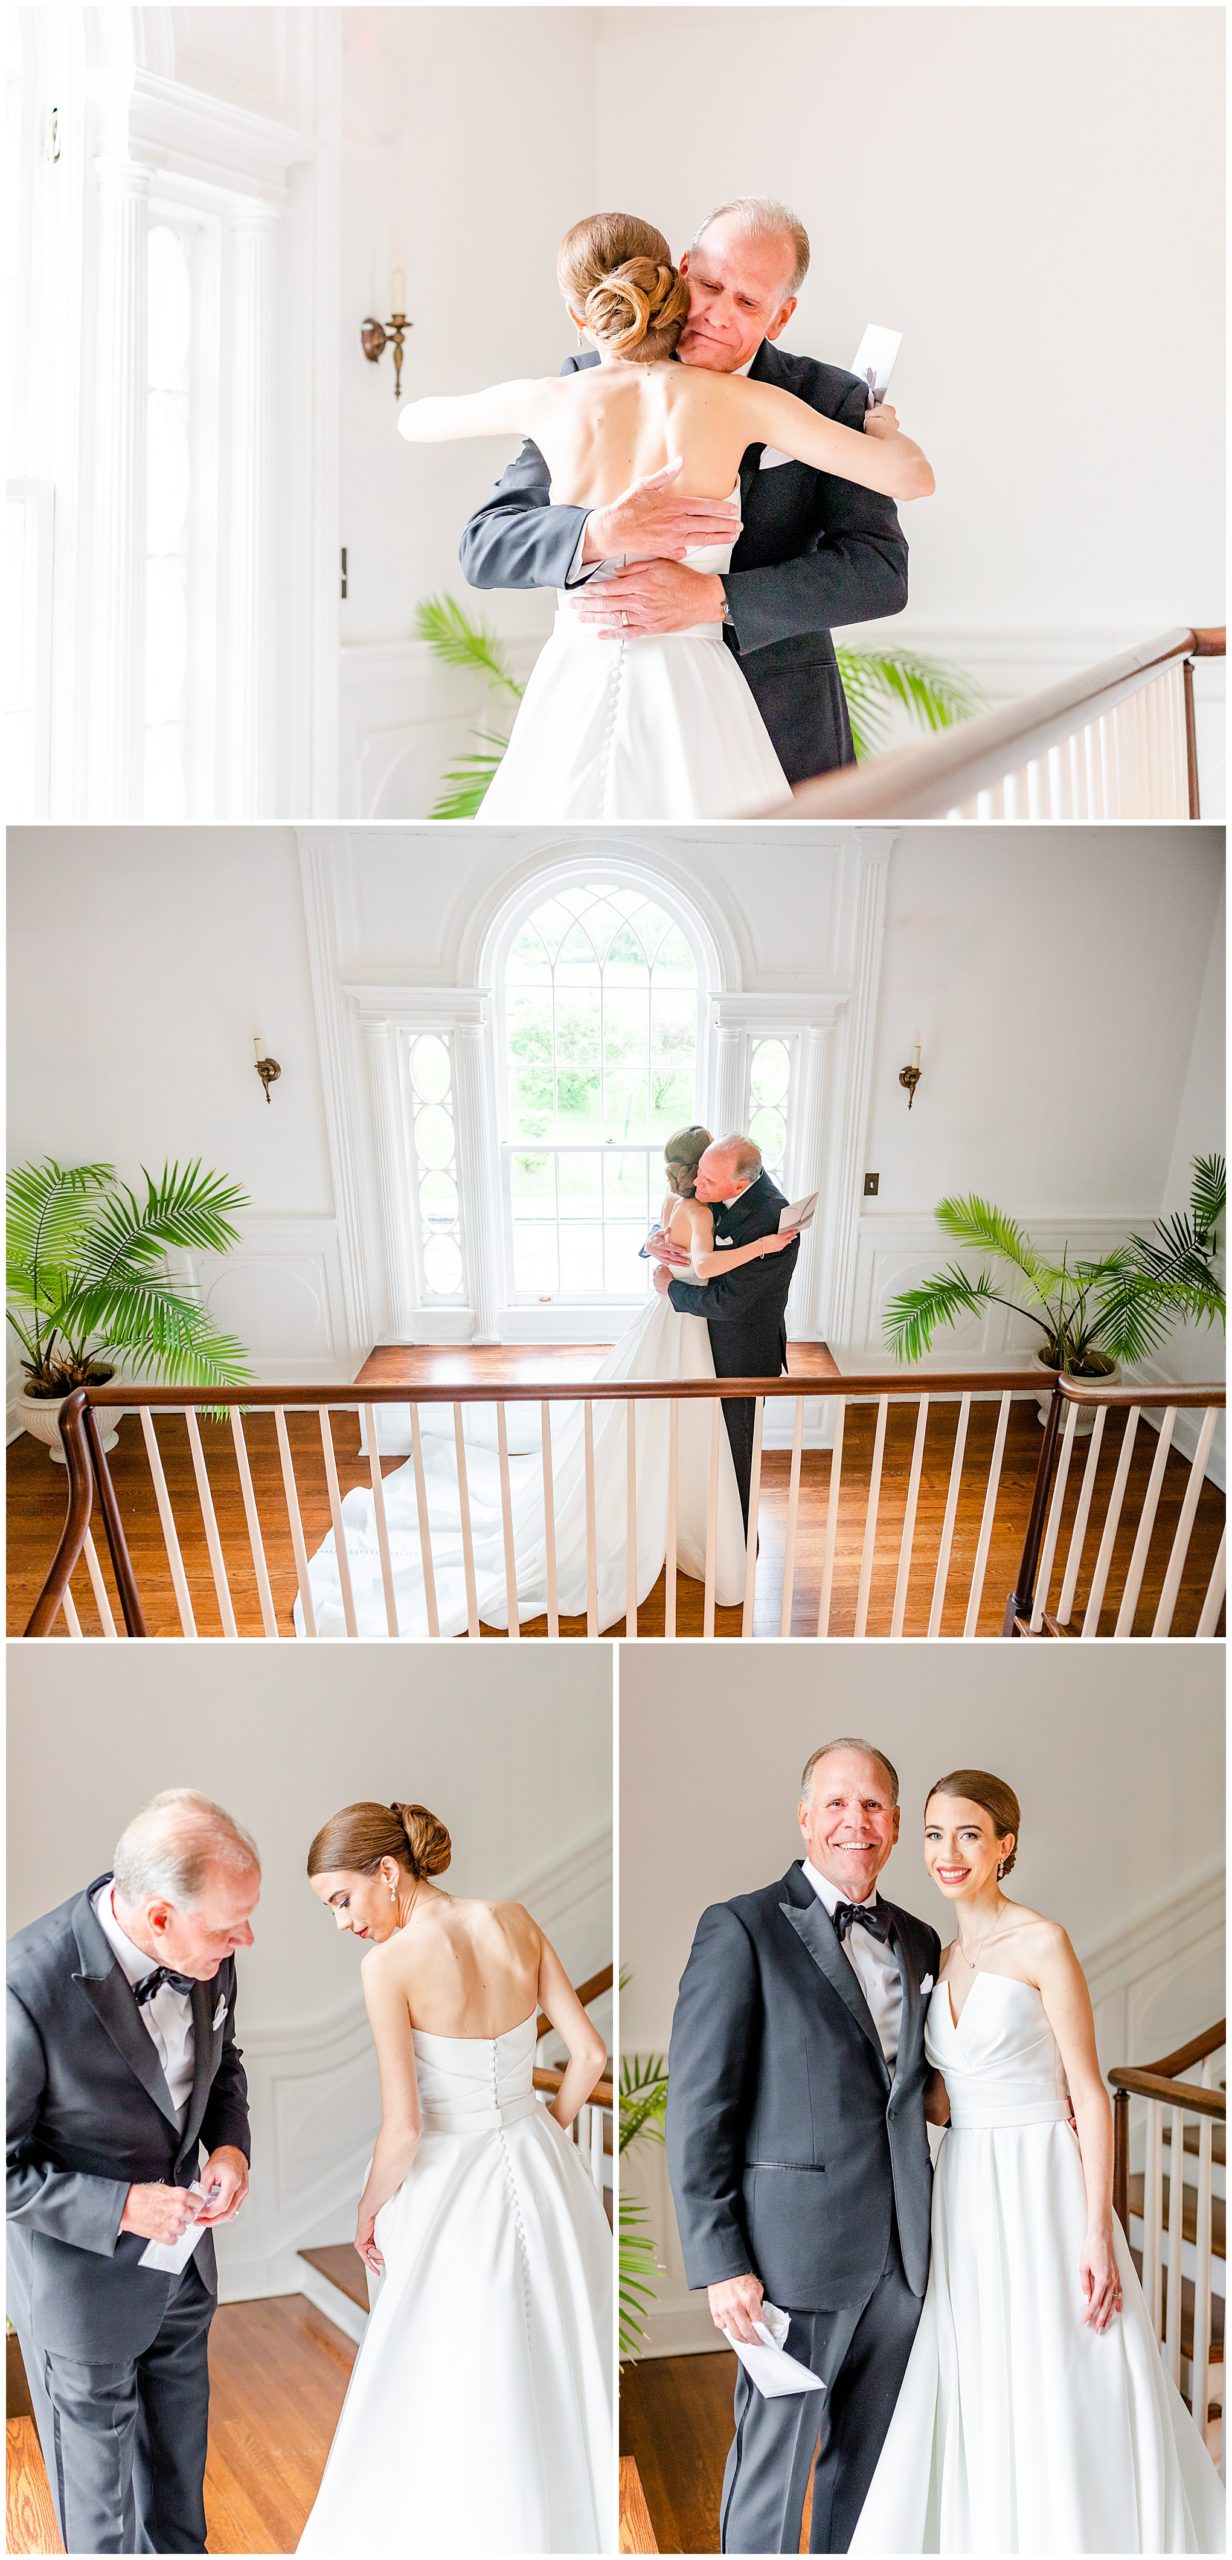 classic Rust Manor House wedding, sprig wedding, black and white aesthetic, classic wedding aesthetic, White Pumpkin Weddings City Tavern Club wedding, Leesburg wedding, Leesbur bride, manor house wedding, classic DC wedding, northern Virginia wedding venue, classic wedding venue, Washington DC wedding photographer, Rachel E.H. Photography, bride doing first look with father, bride hugging father, father looking at brides dress